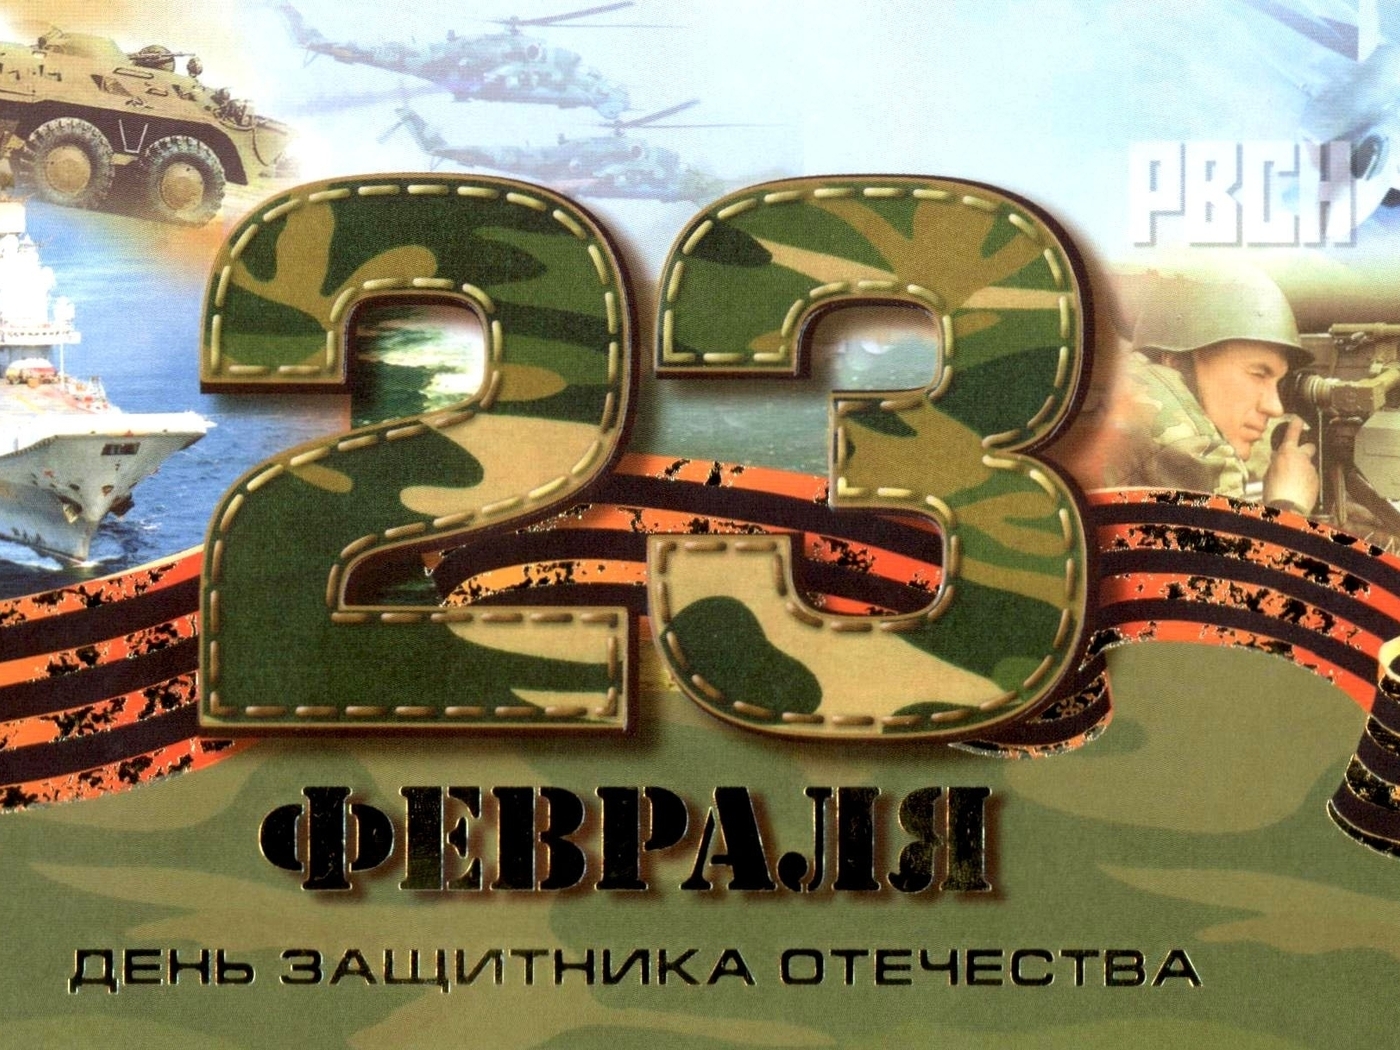 Image: Day of Defender of the Fatherland, holiday, 23 February